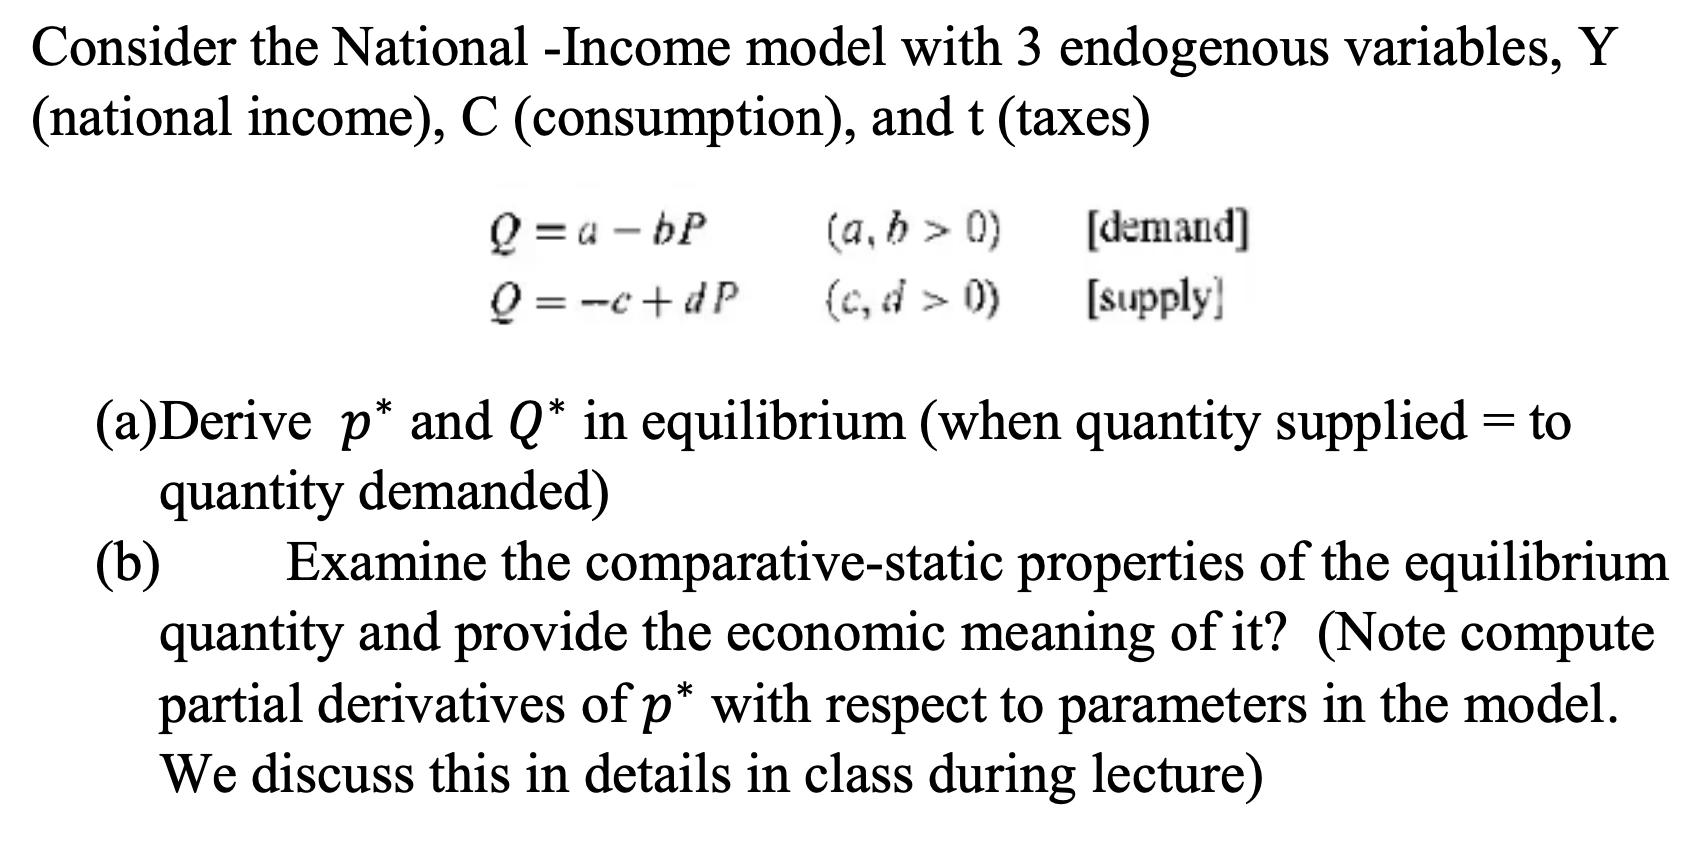 Consider the National -Income model with 3 endogenous variables, Y (national income), C (consumption), and t